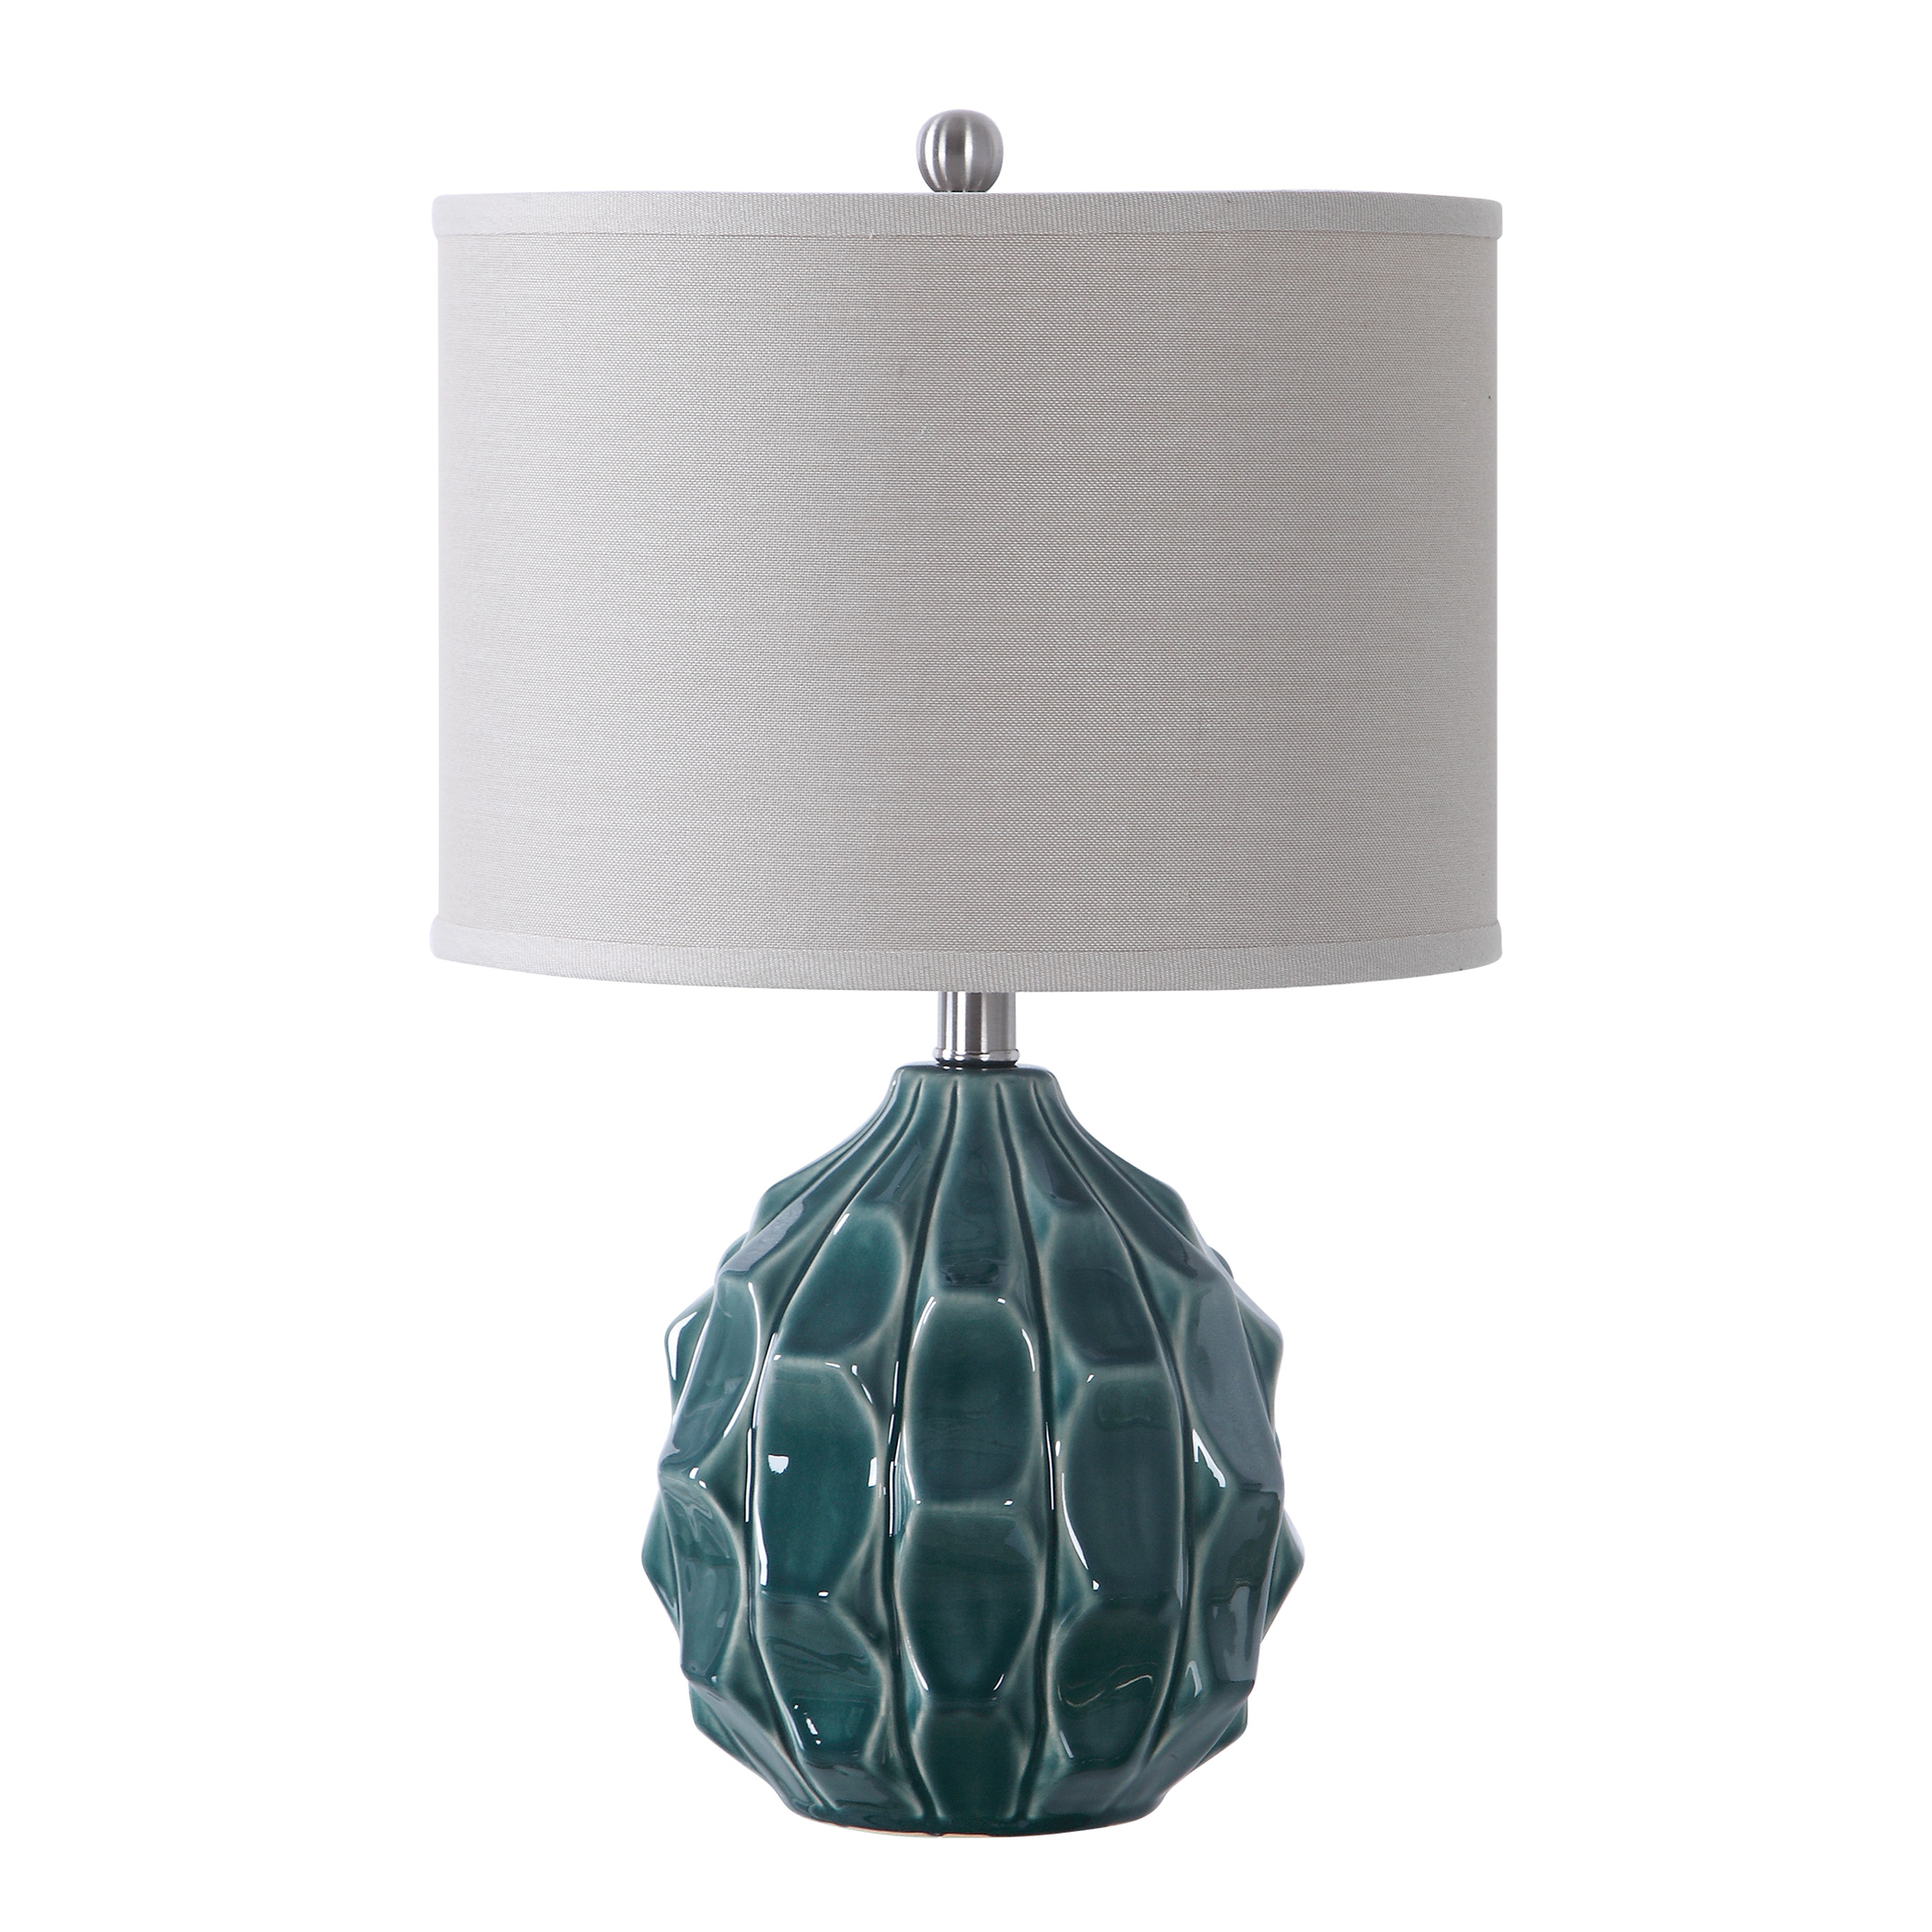 Scalloped Ceramic Table Lamp - Hudsonhill Foundry